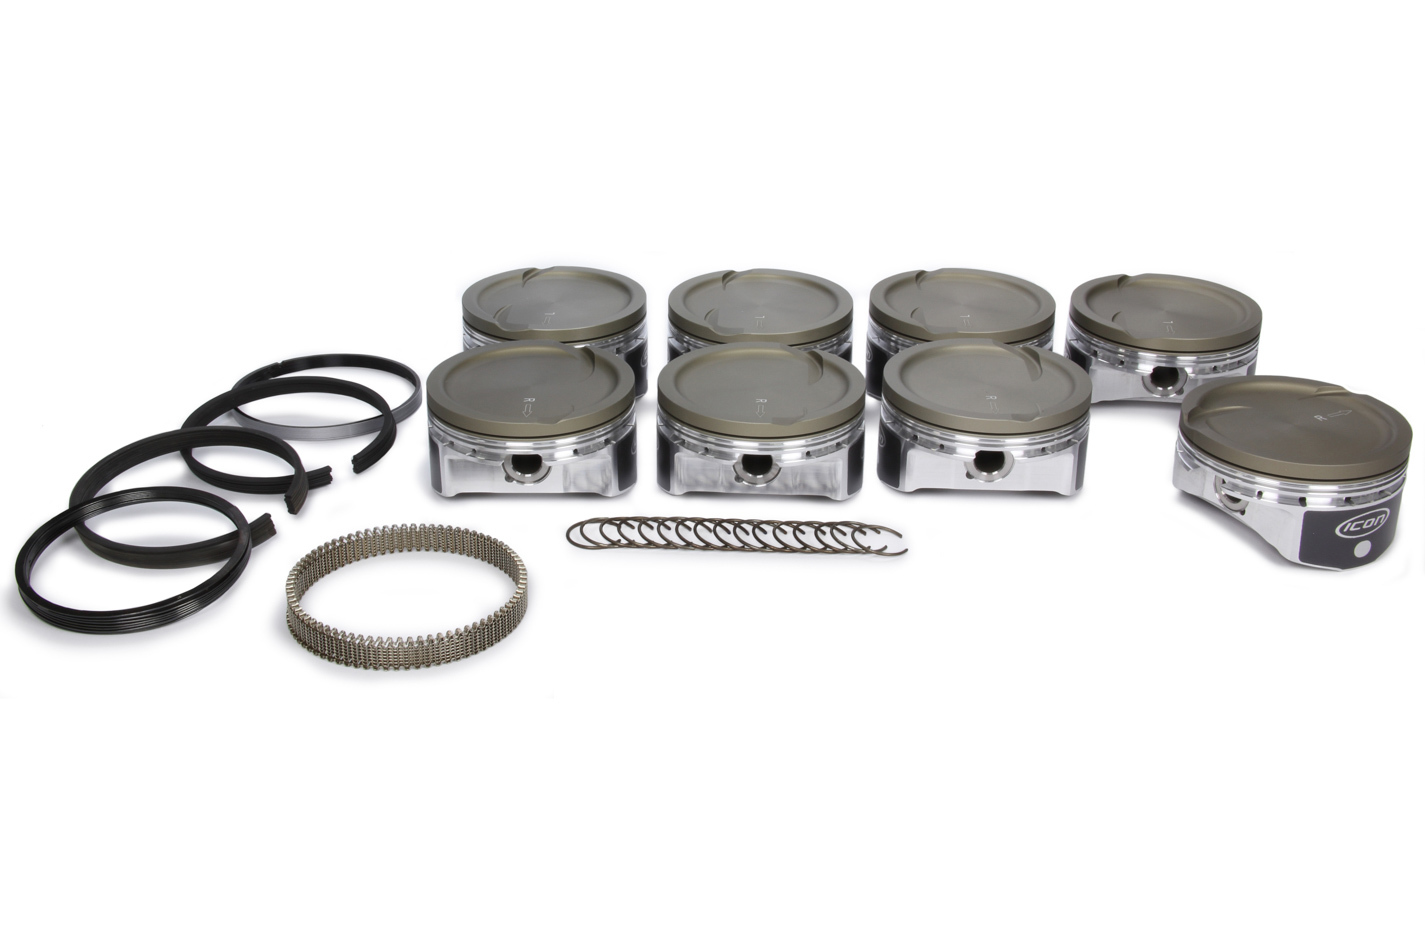 Icon Pistons IC532CAKTS.030 Piston and Ring, Premium Forged, Forged, 4.030 in Bore, 1.2 x 1.2 x 3.0 mm Ring Groove, Minus 20.00 cc, GM LS-Series, Kit